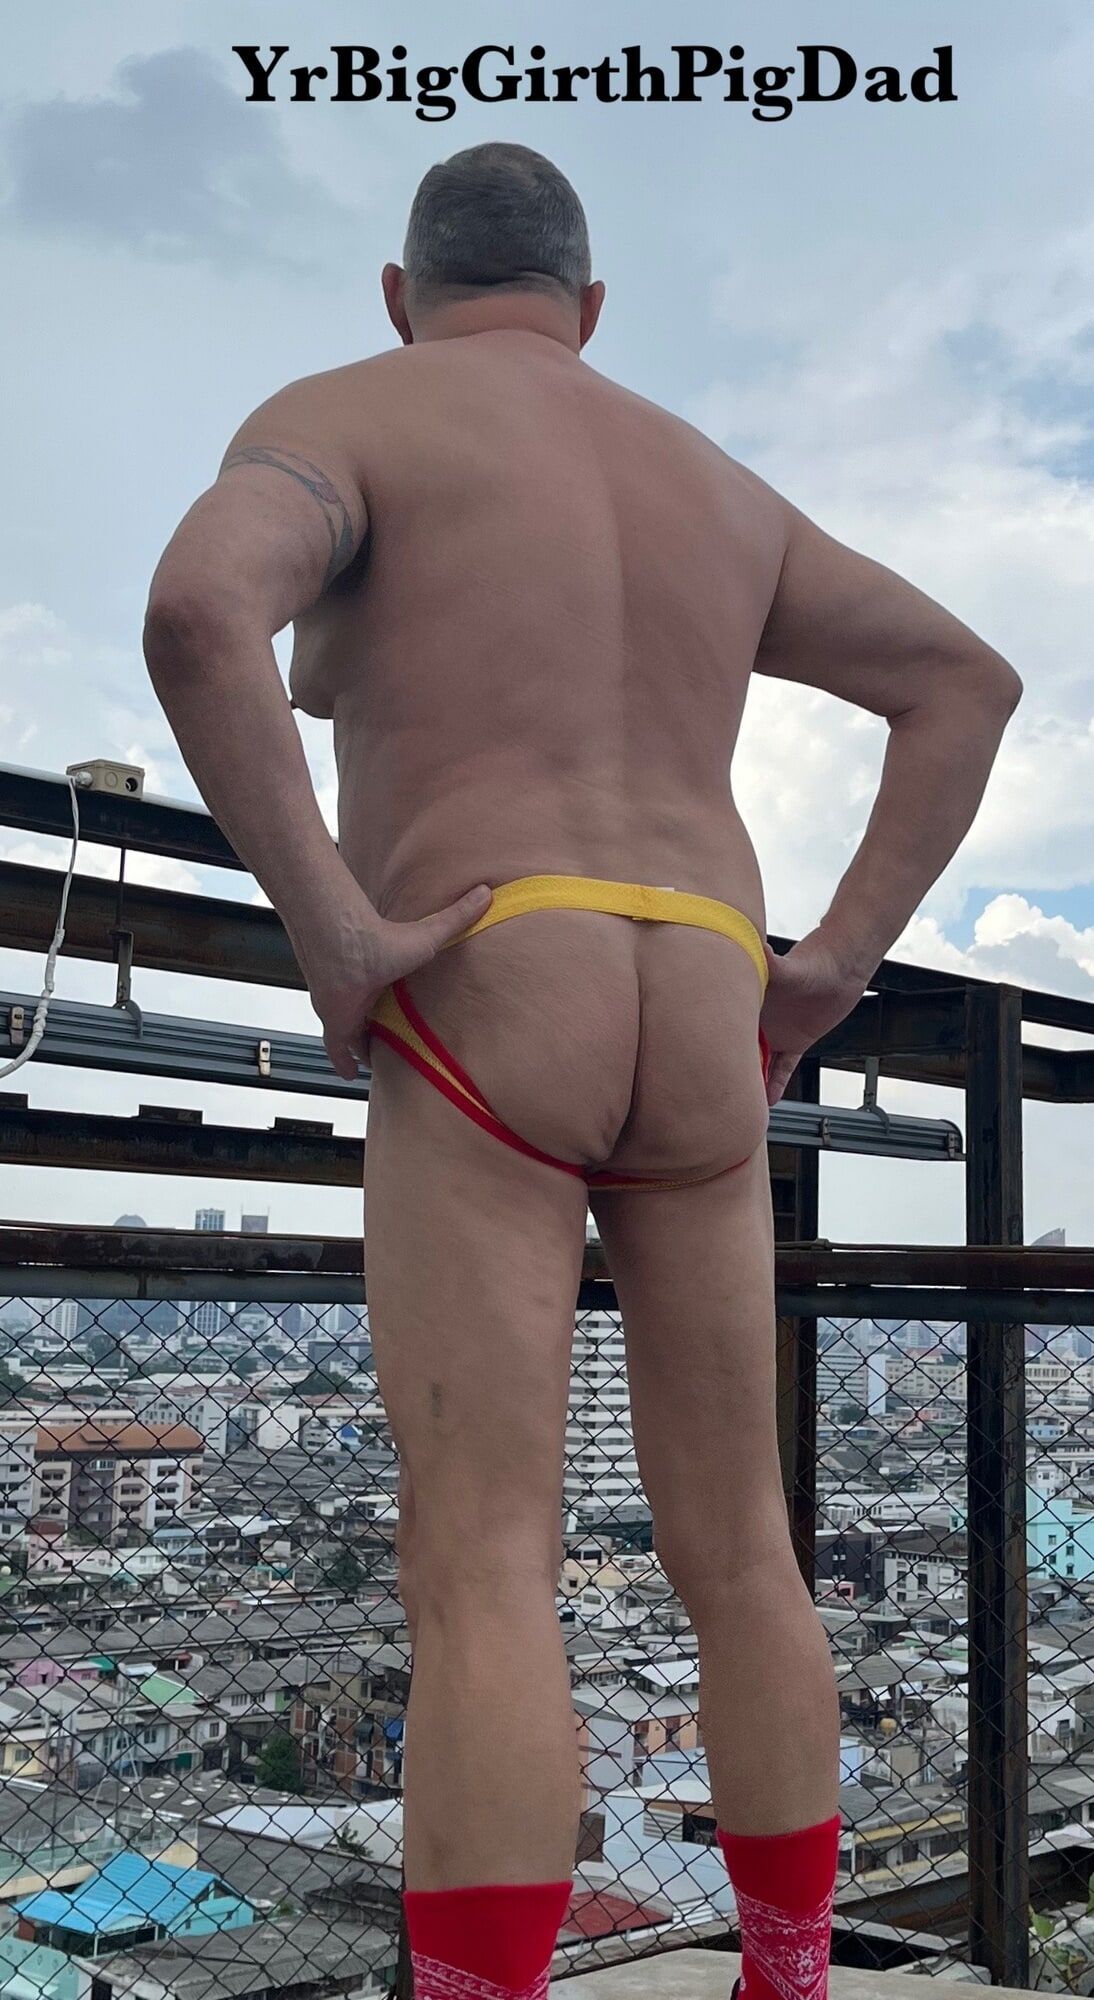 New Jockstrap collection on the roof of my condo. #13